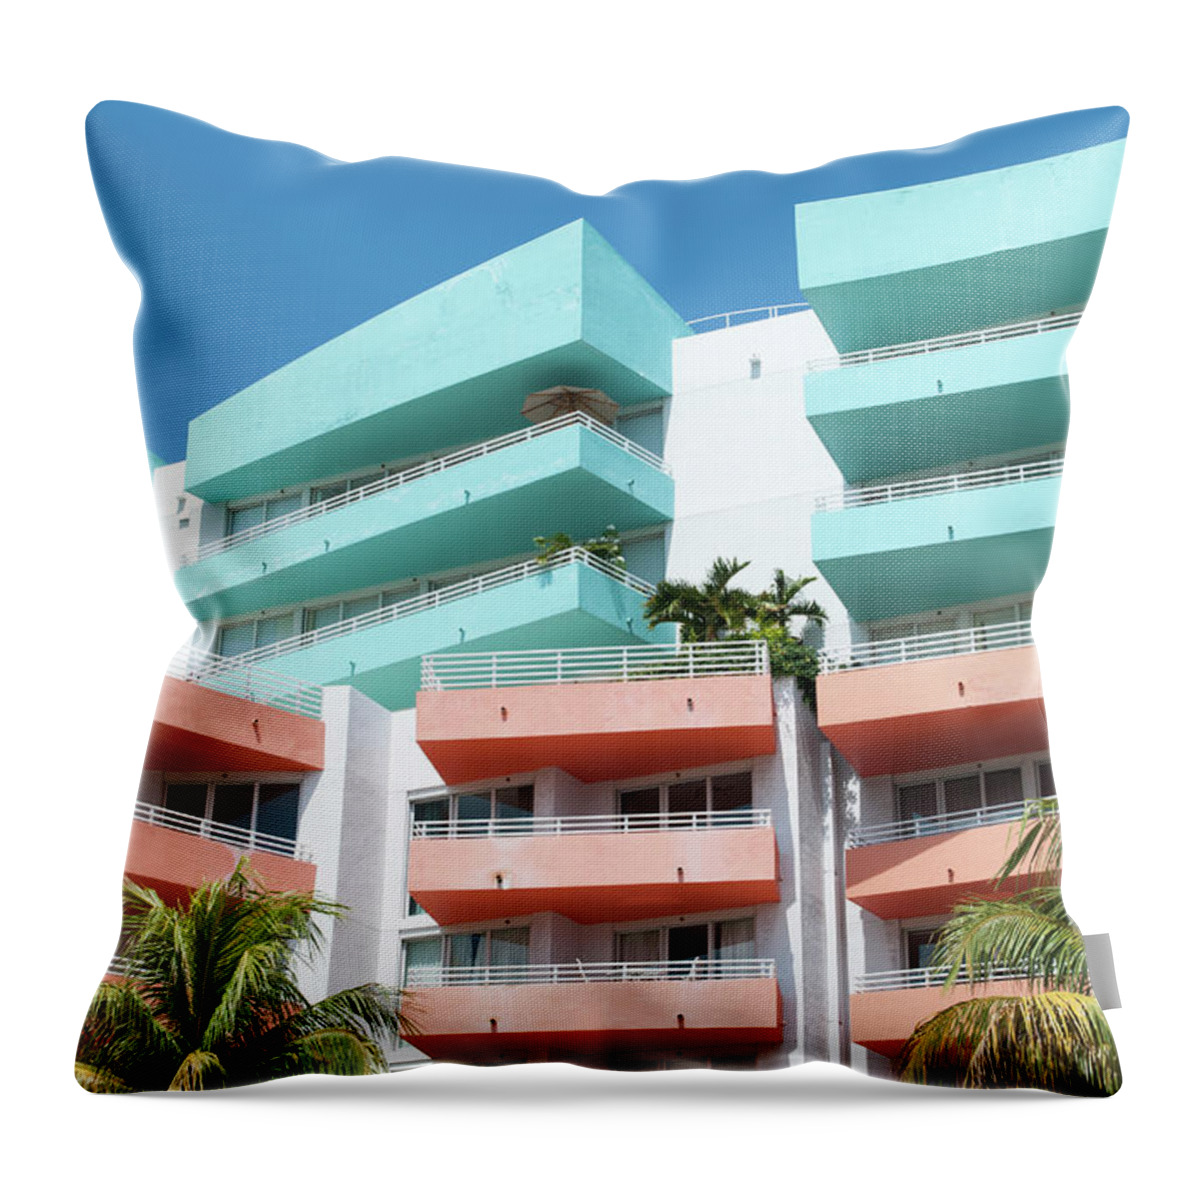 Building Throw Pillow featuring the photograph Miami Beach Colors by Ramunas Bruzas